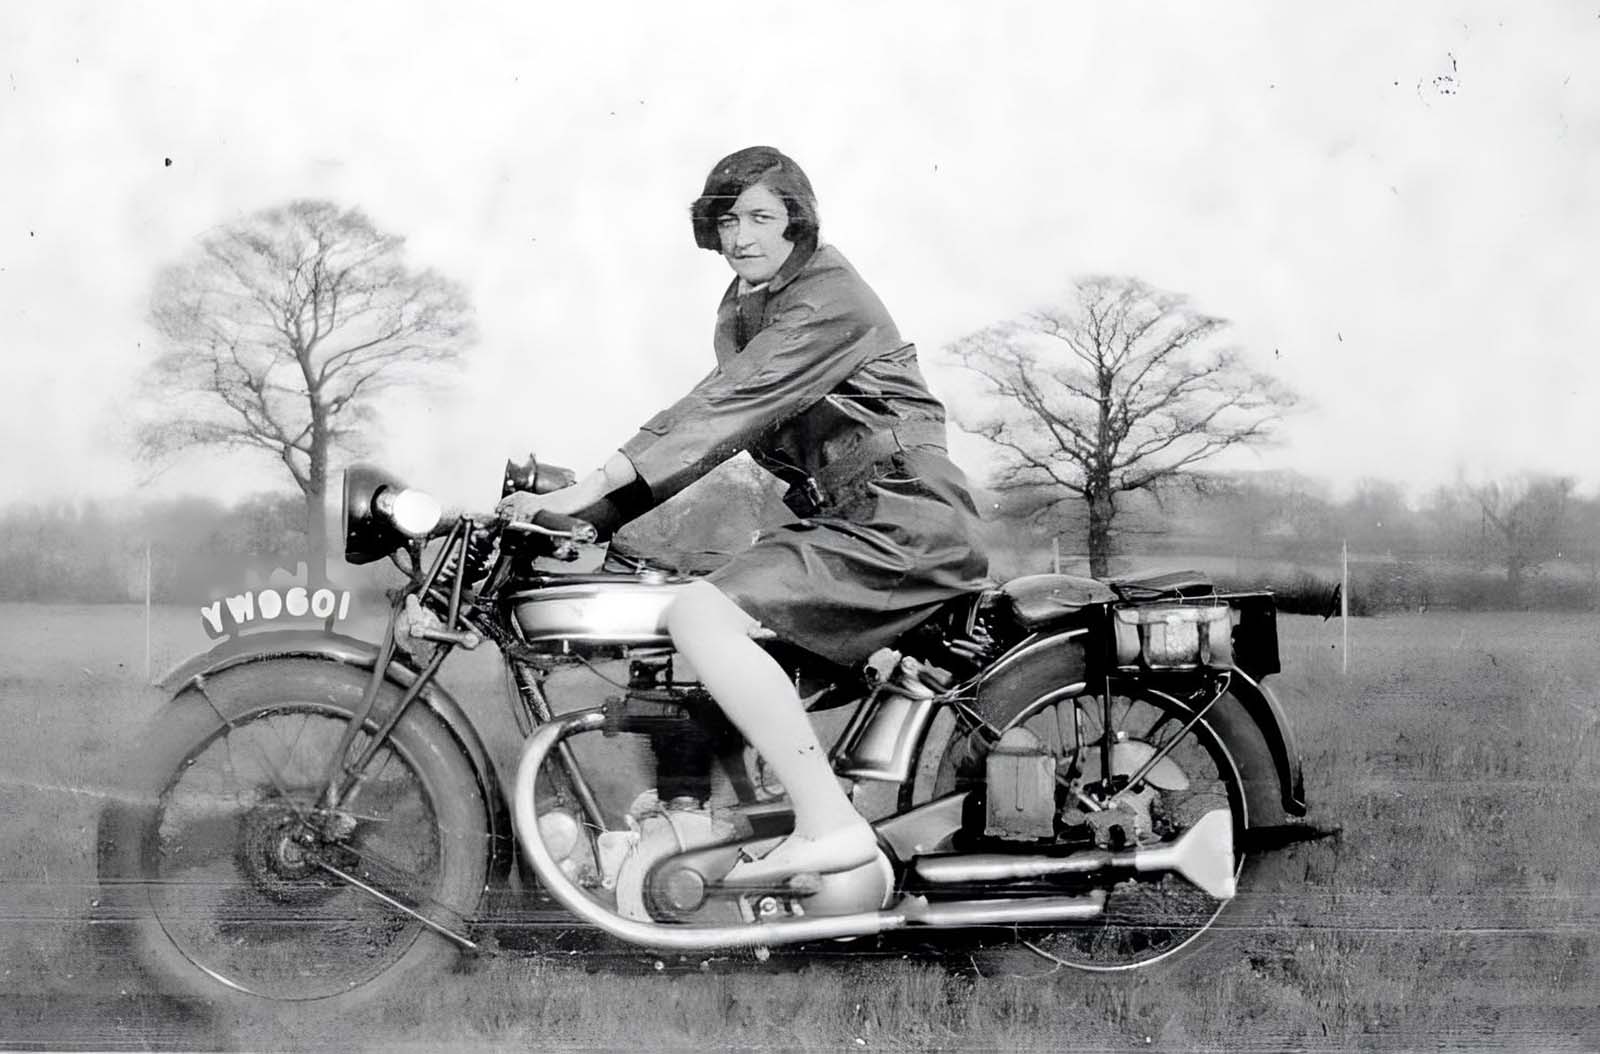 Women and Motorcycling: Vintage Photos of Women Riding Motorcycles in the Early 20th Century